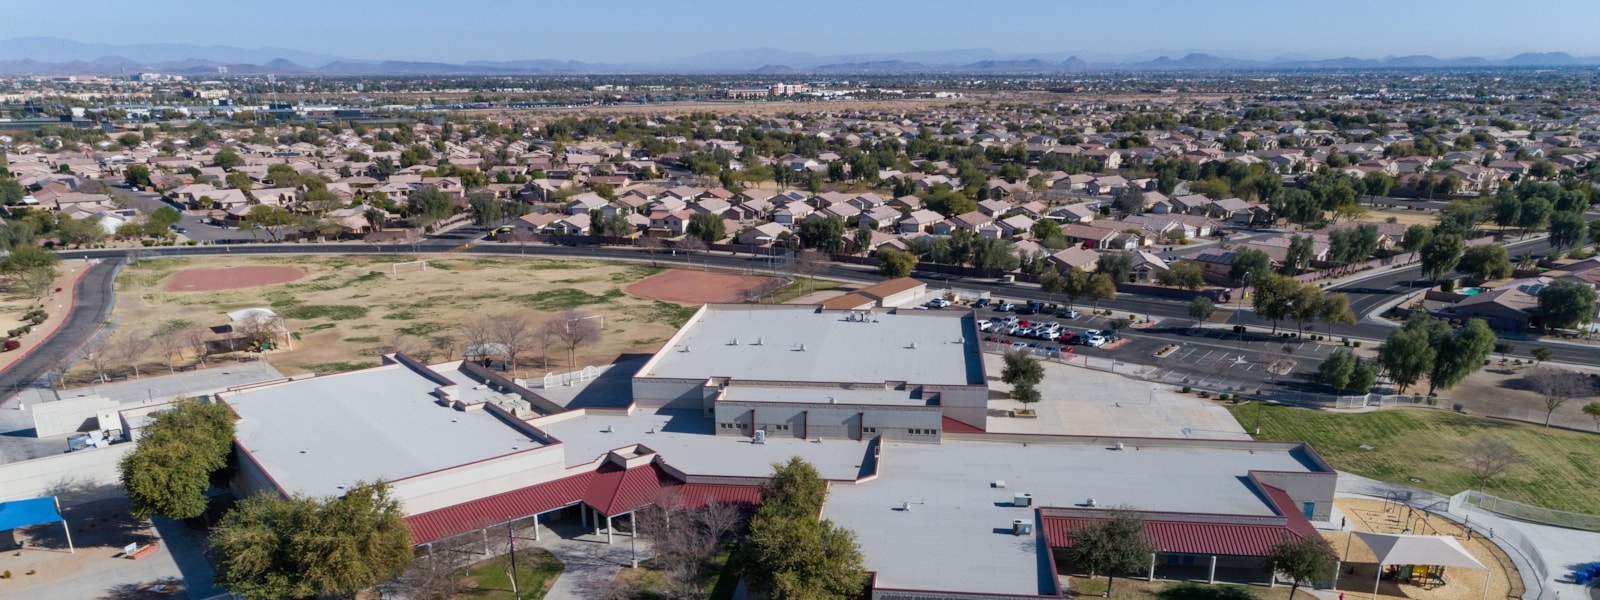 aerial picture of school